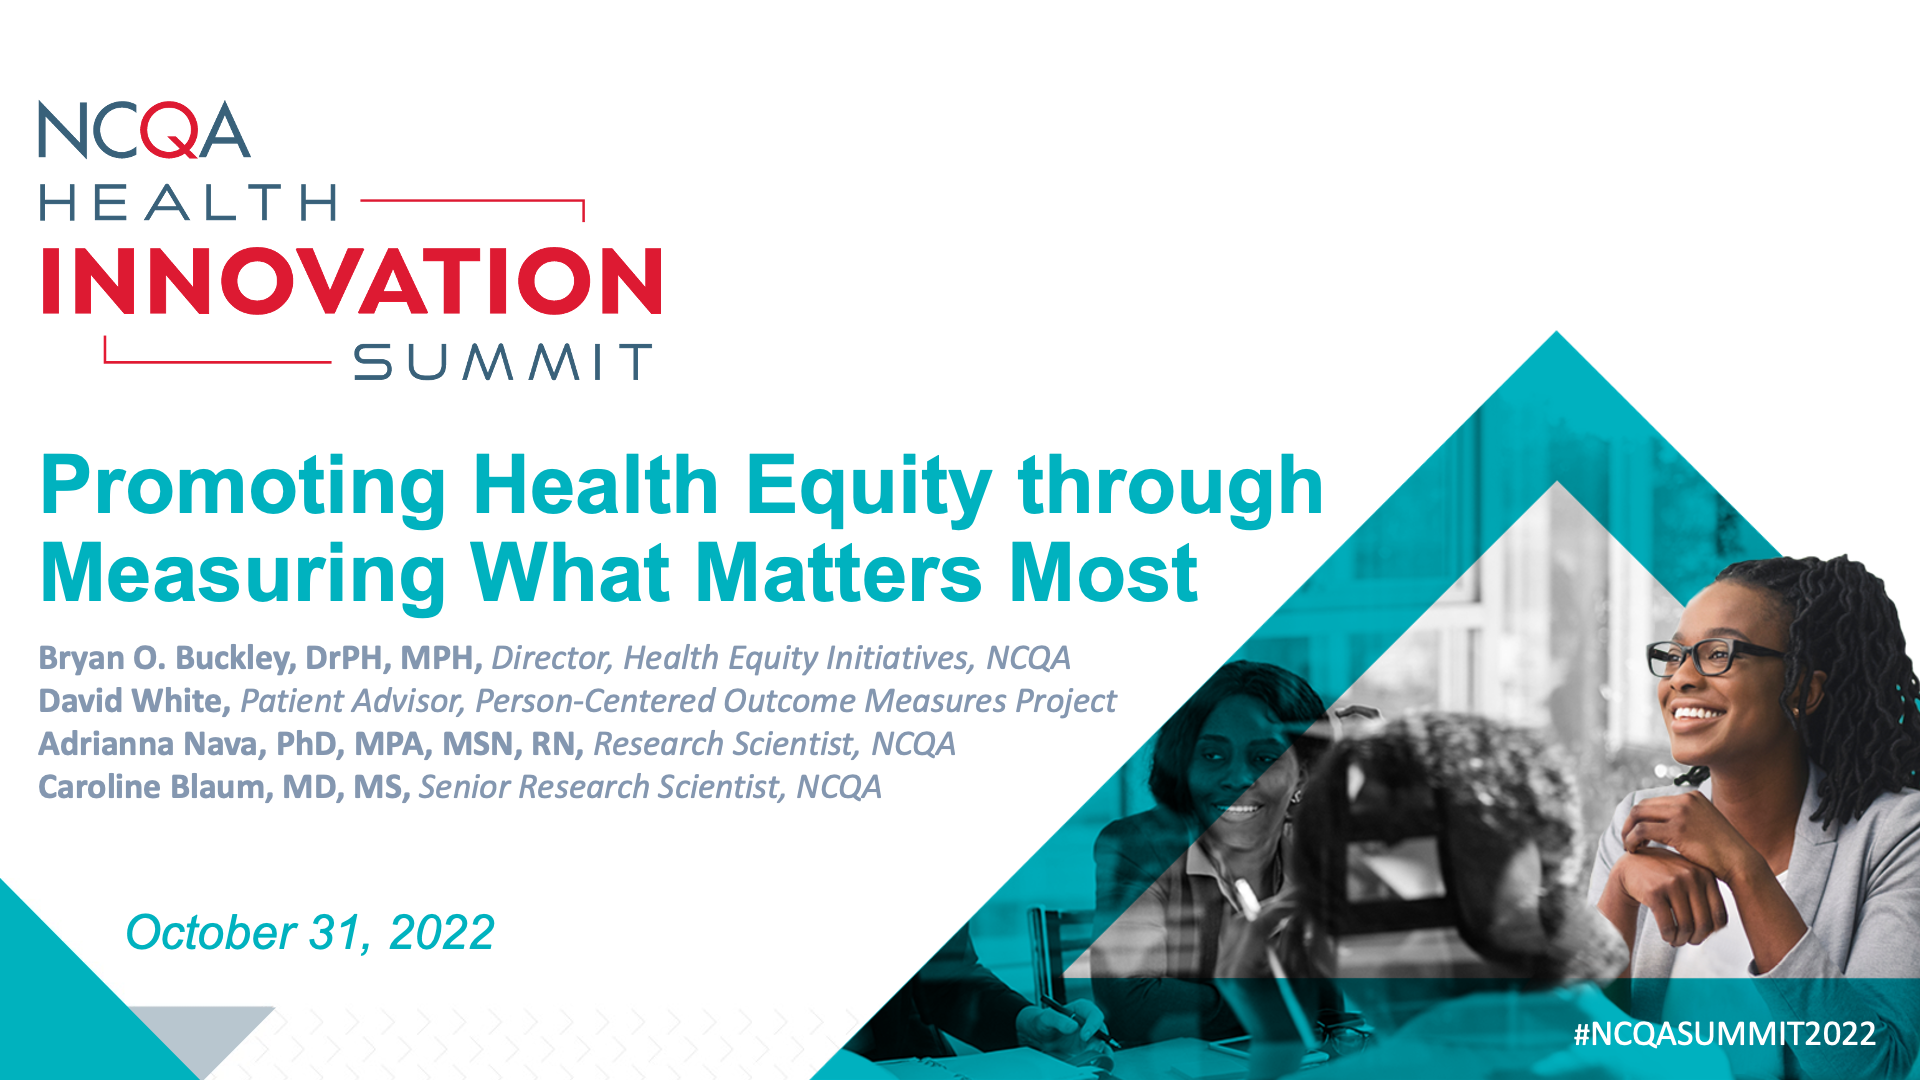 NCQA 2022 Health Innovation Summit Session Promoting Equity by